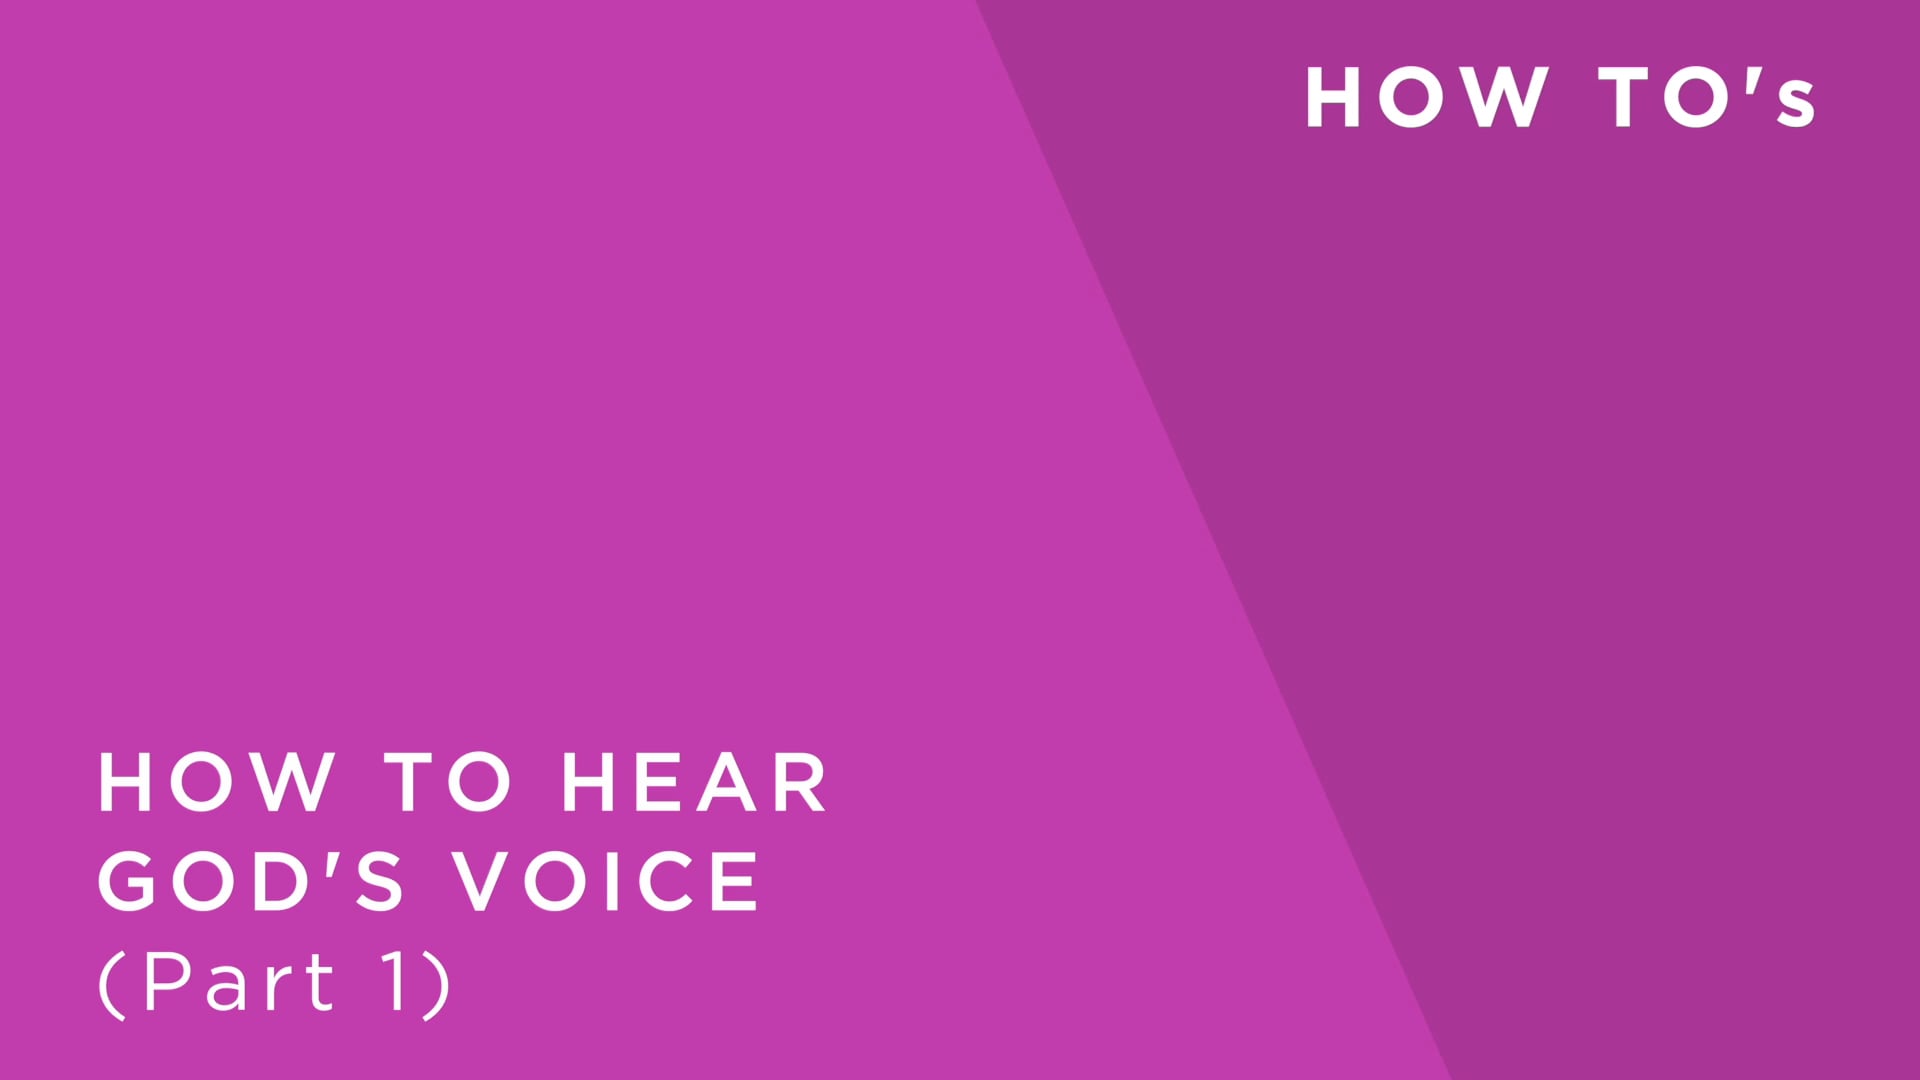 How to Hear God's Voice - Part 1